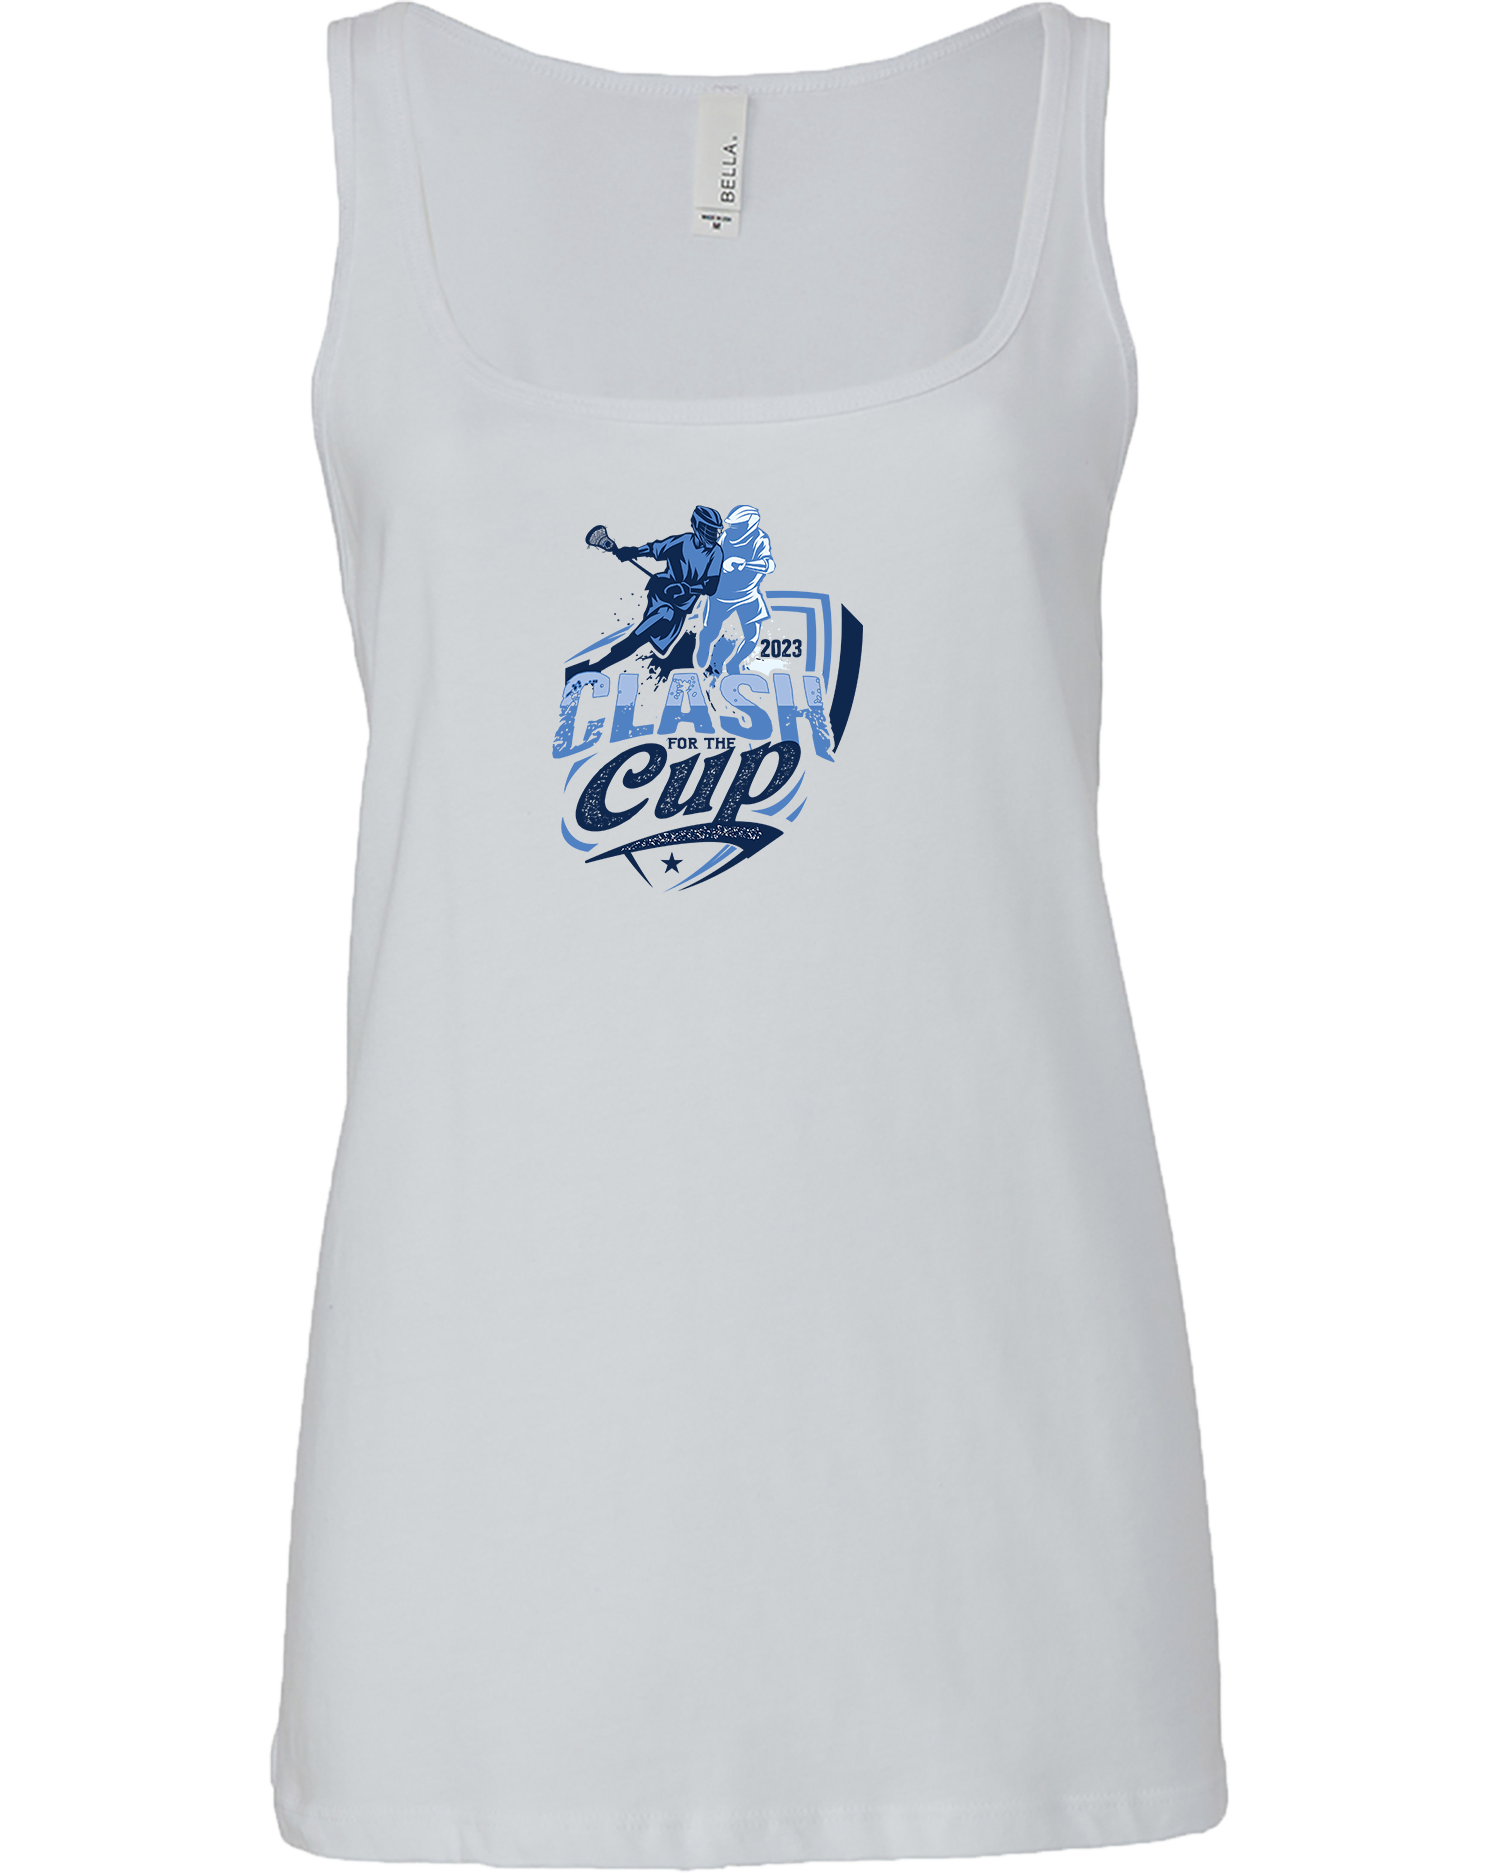 TANK TOP - 2023 Clash For The Cup